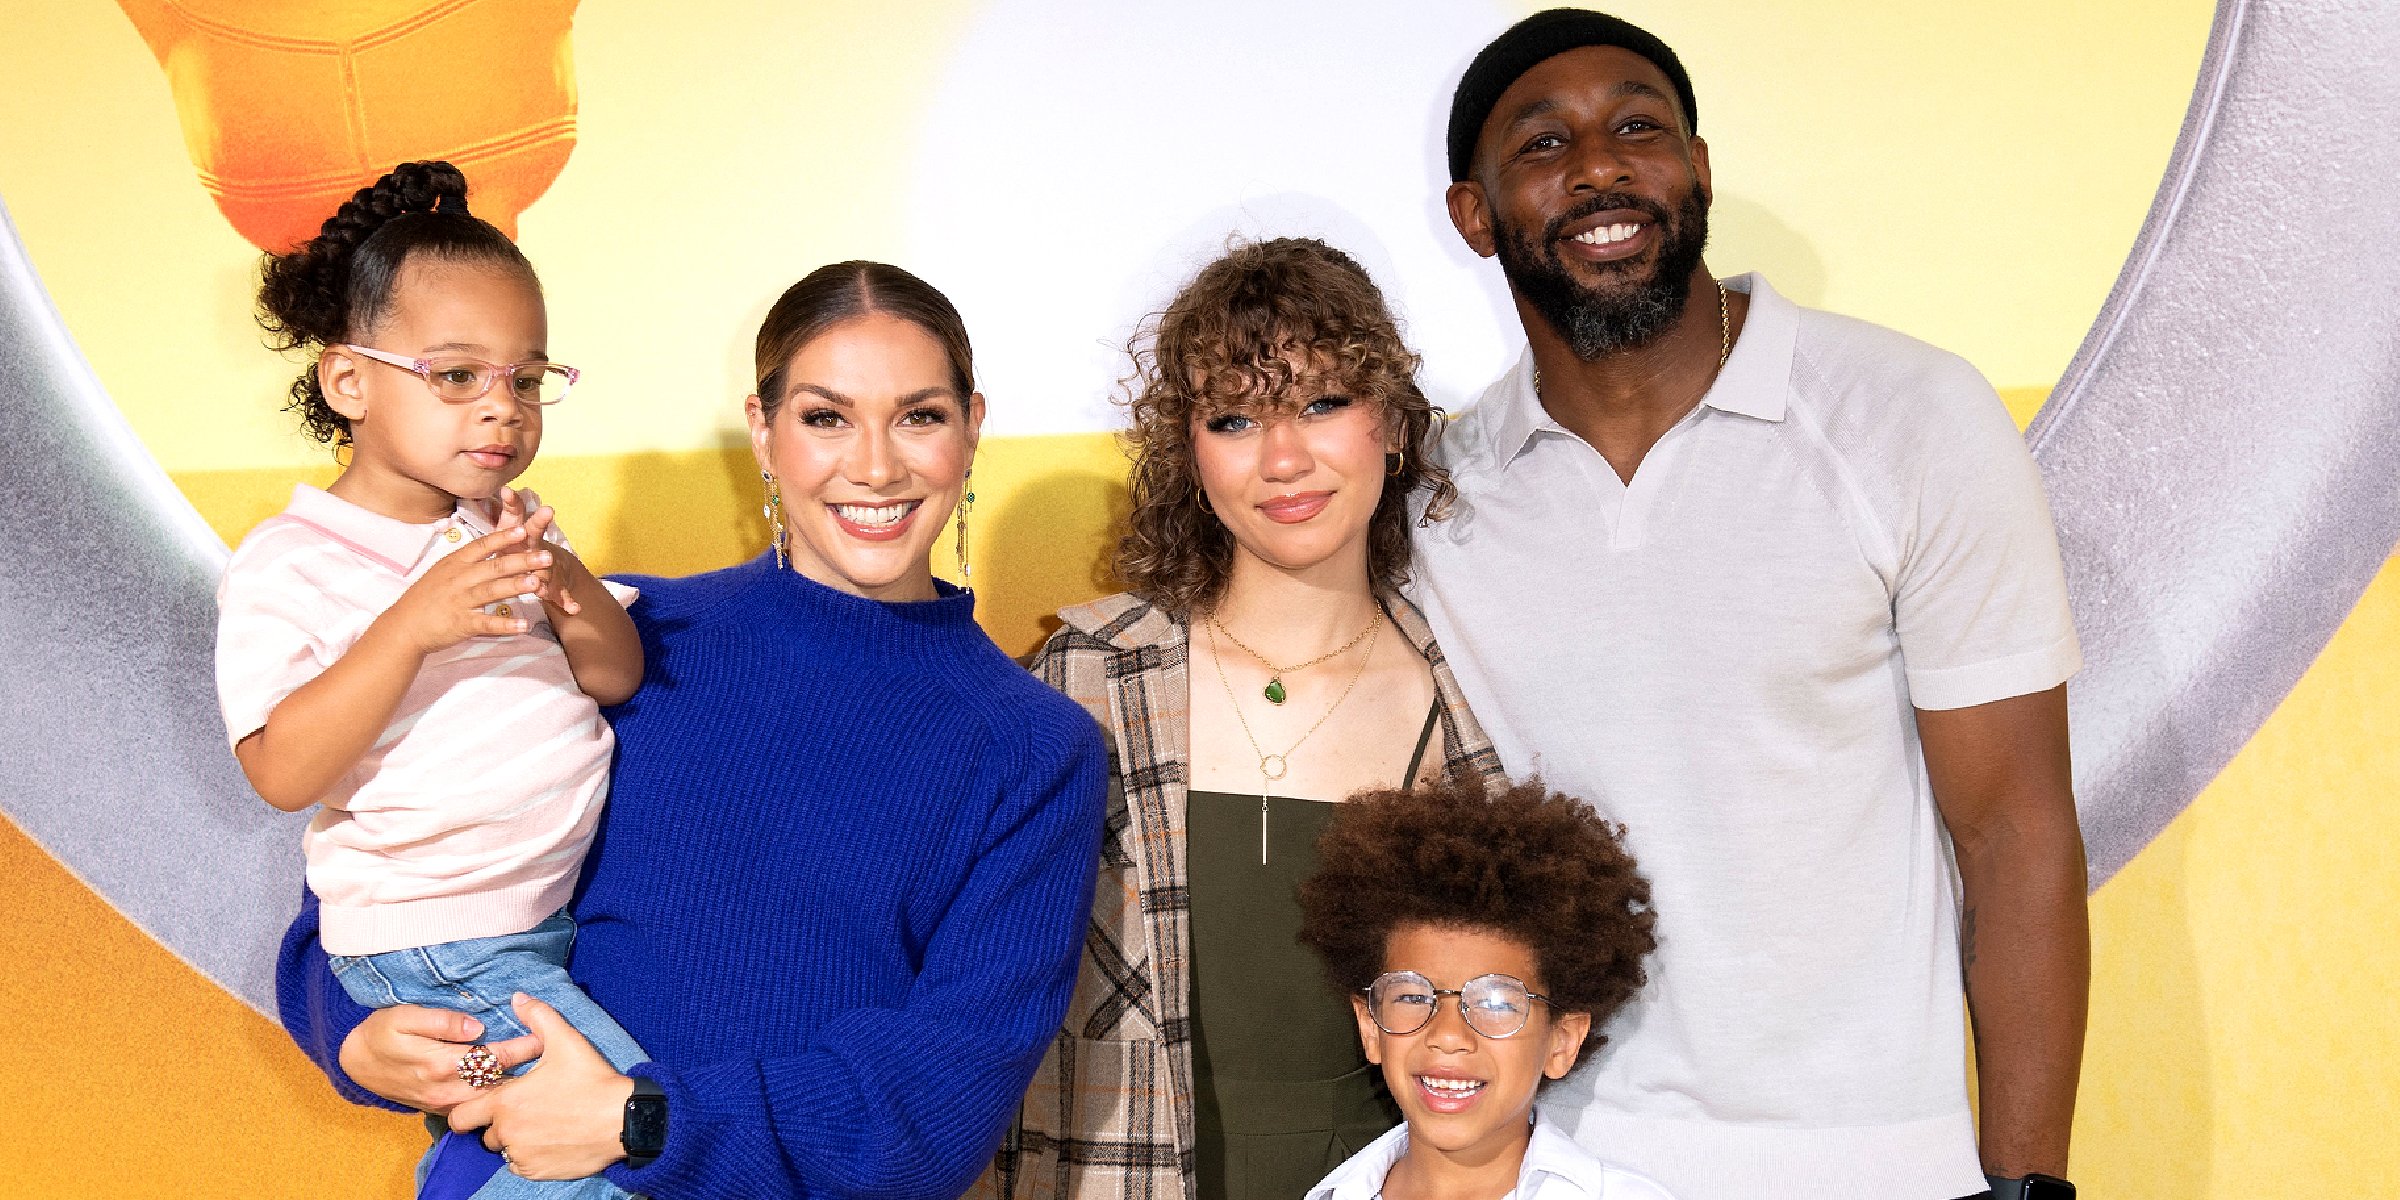 Stephen "tWitch" Boss and his family | Source: Getty Images